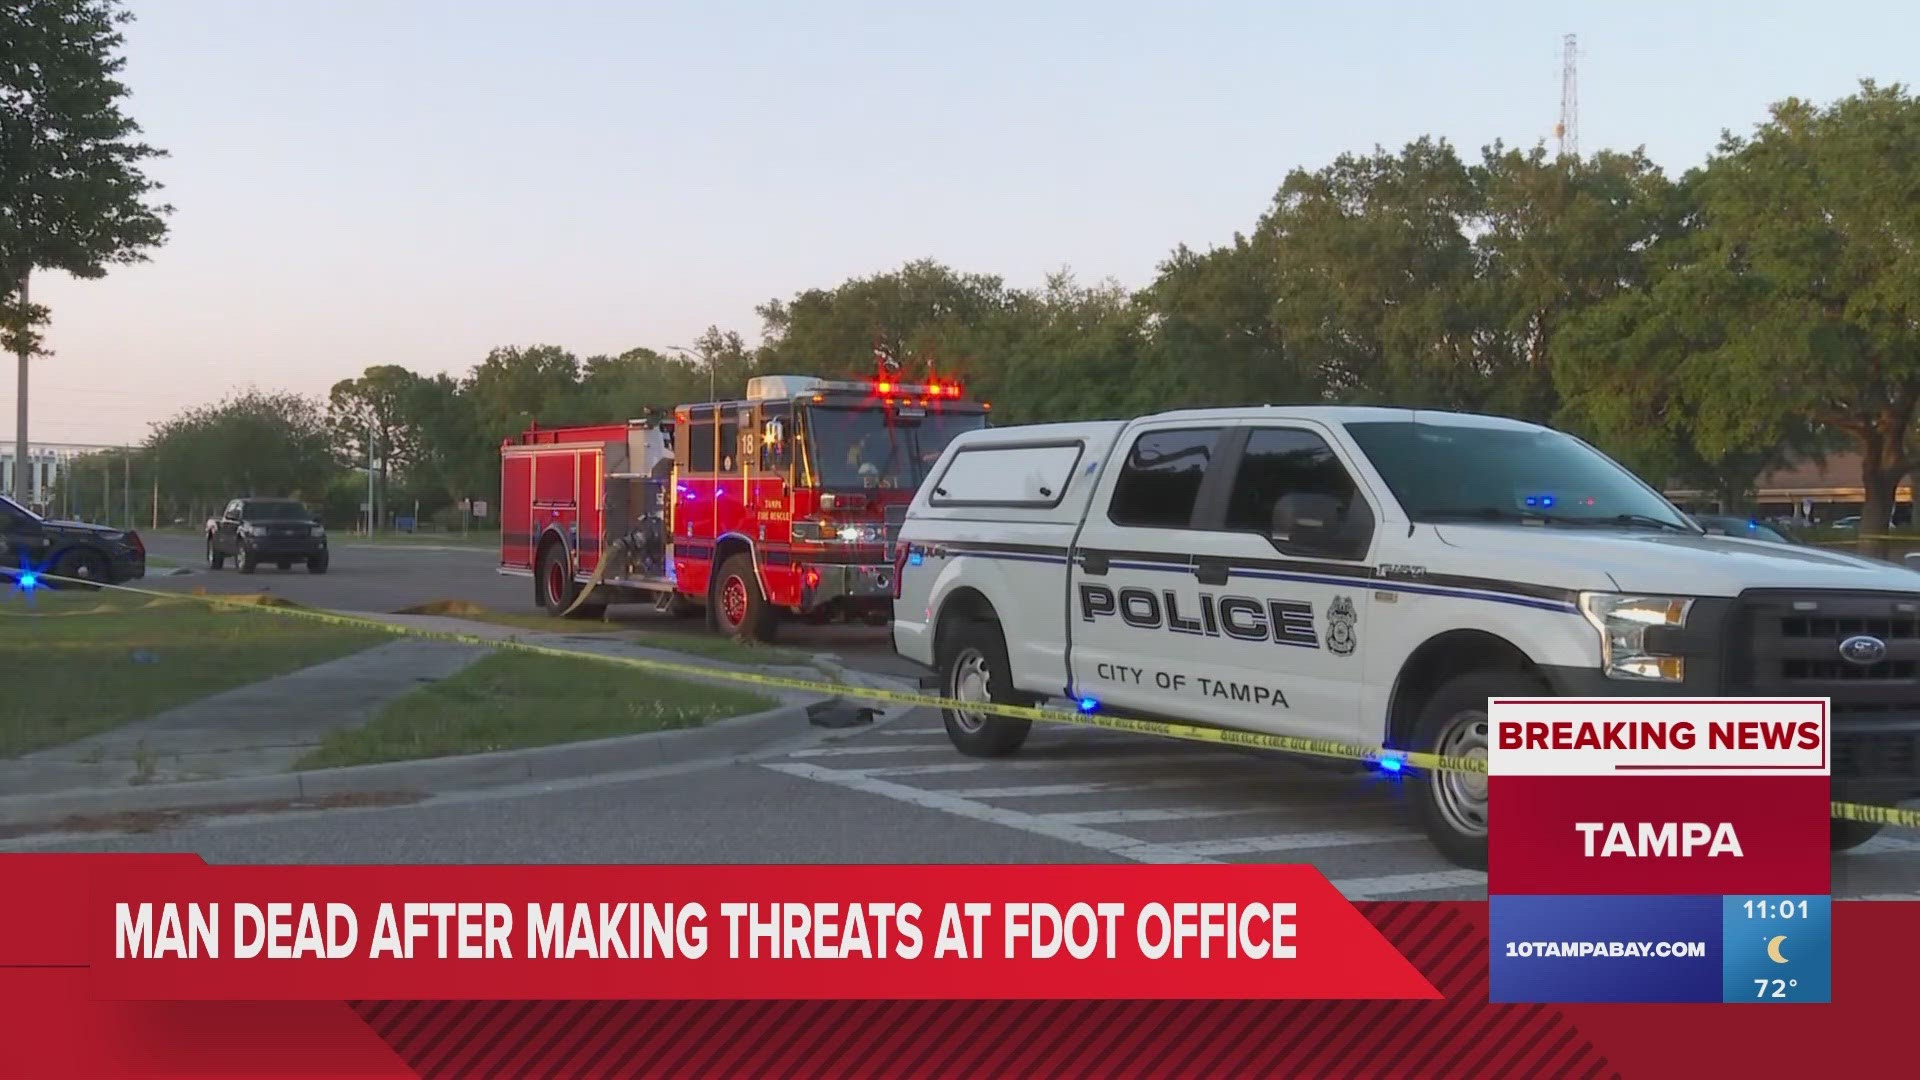 Items like handguns, wires, high-capacity magazines and tanks of gas were reportedly found in the man's car. The FDOT office was evacuated.